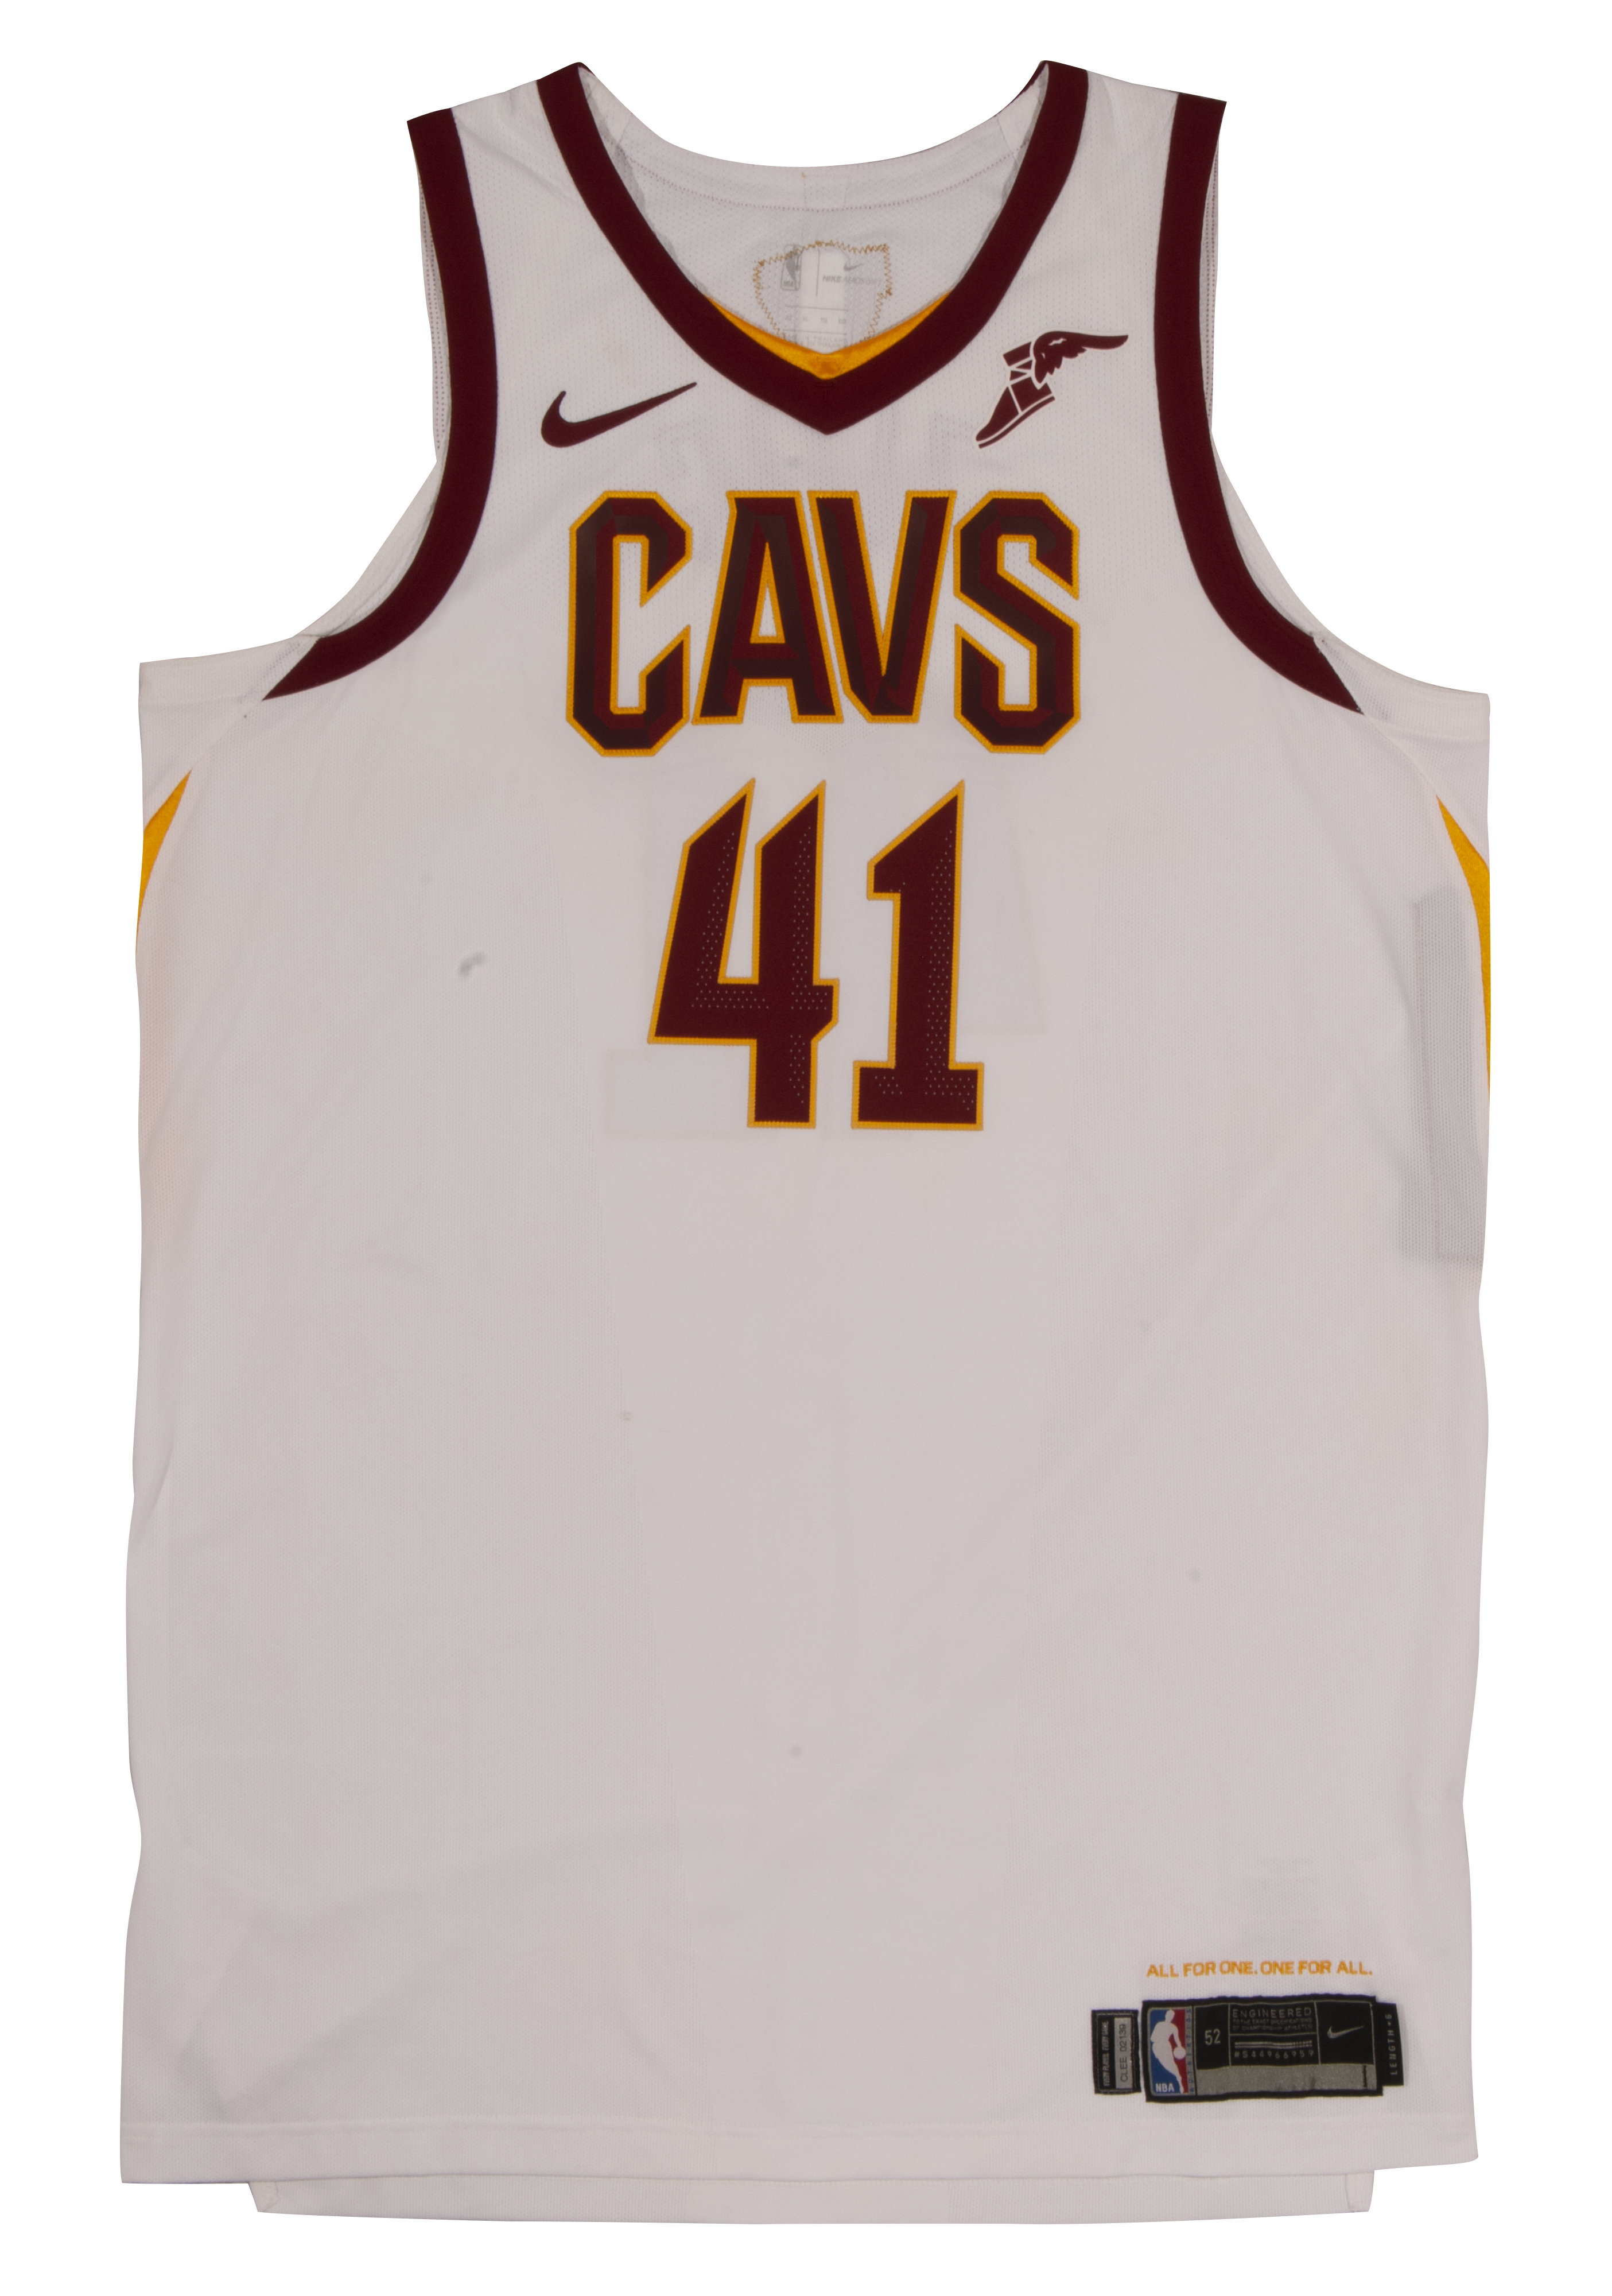 Report: Cleveland Cavaliers to add 2 new jerseys for 2018-19